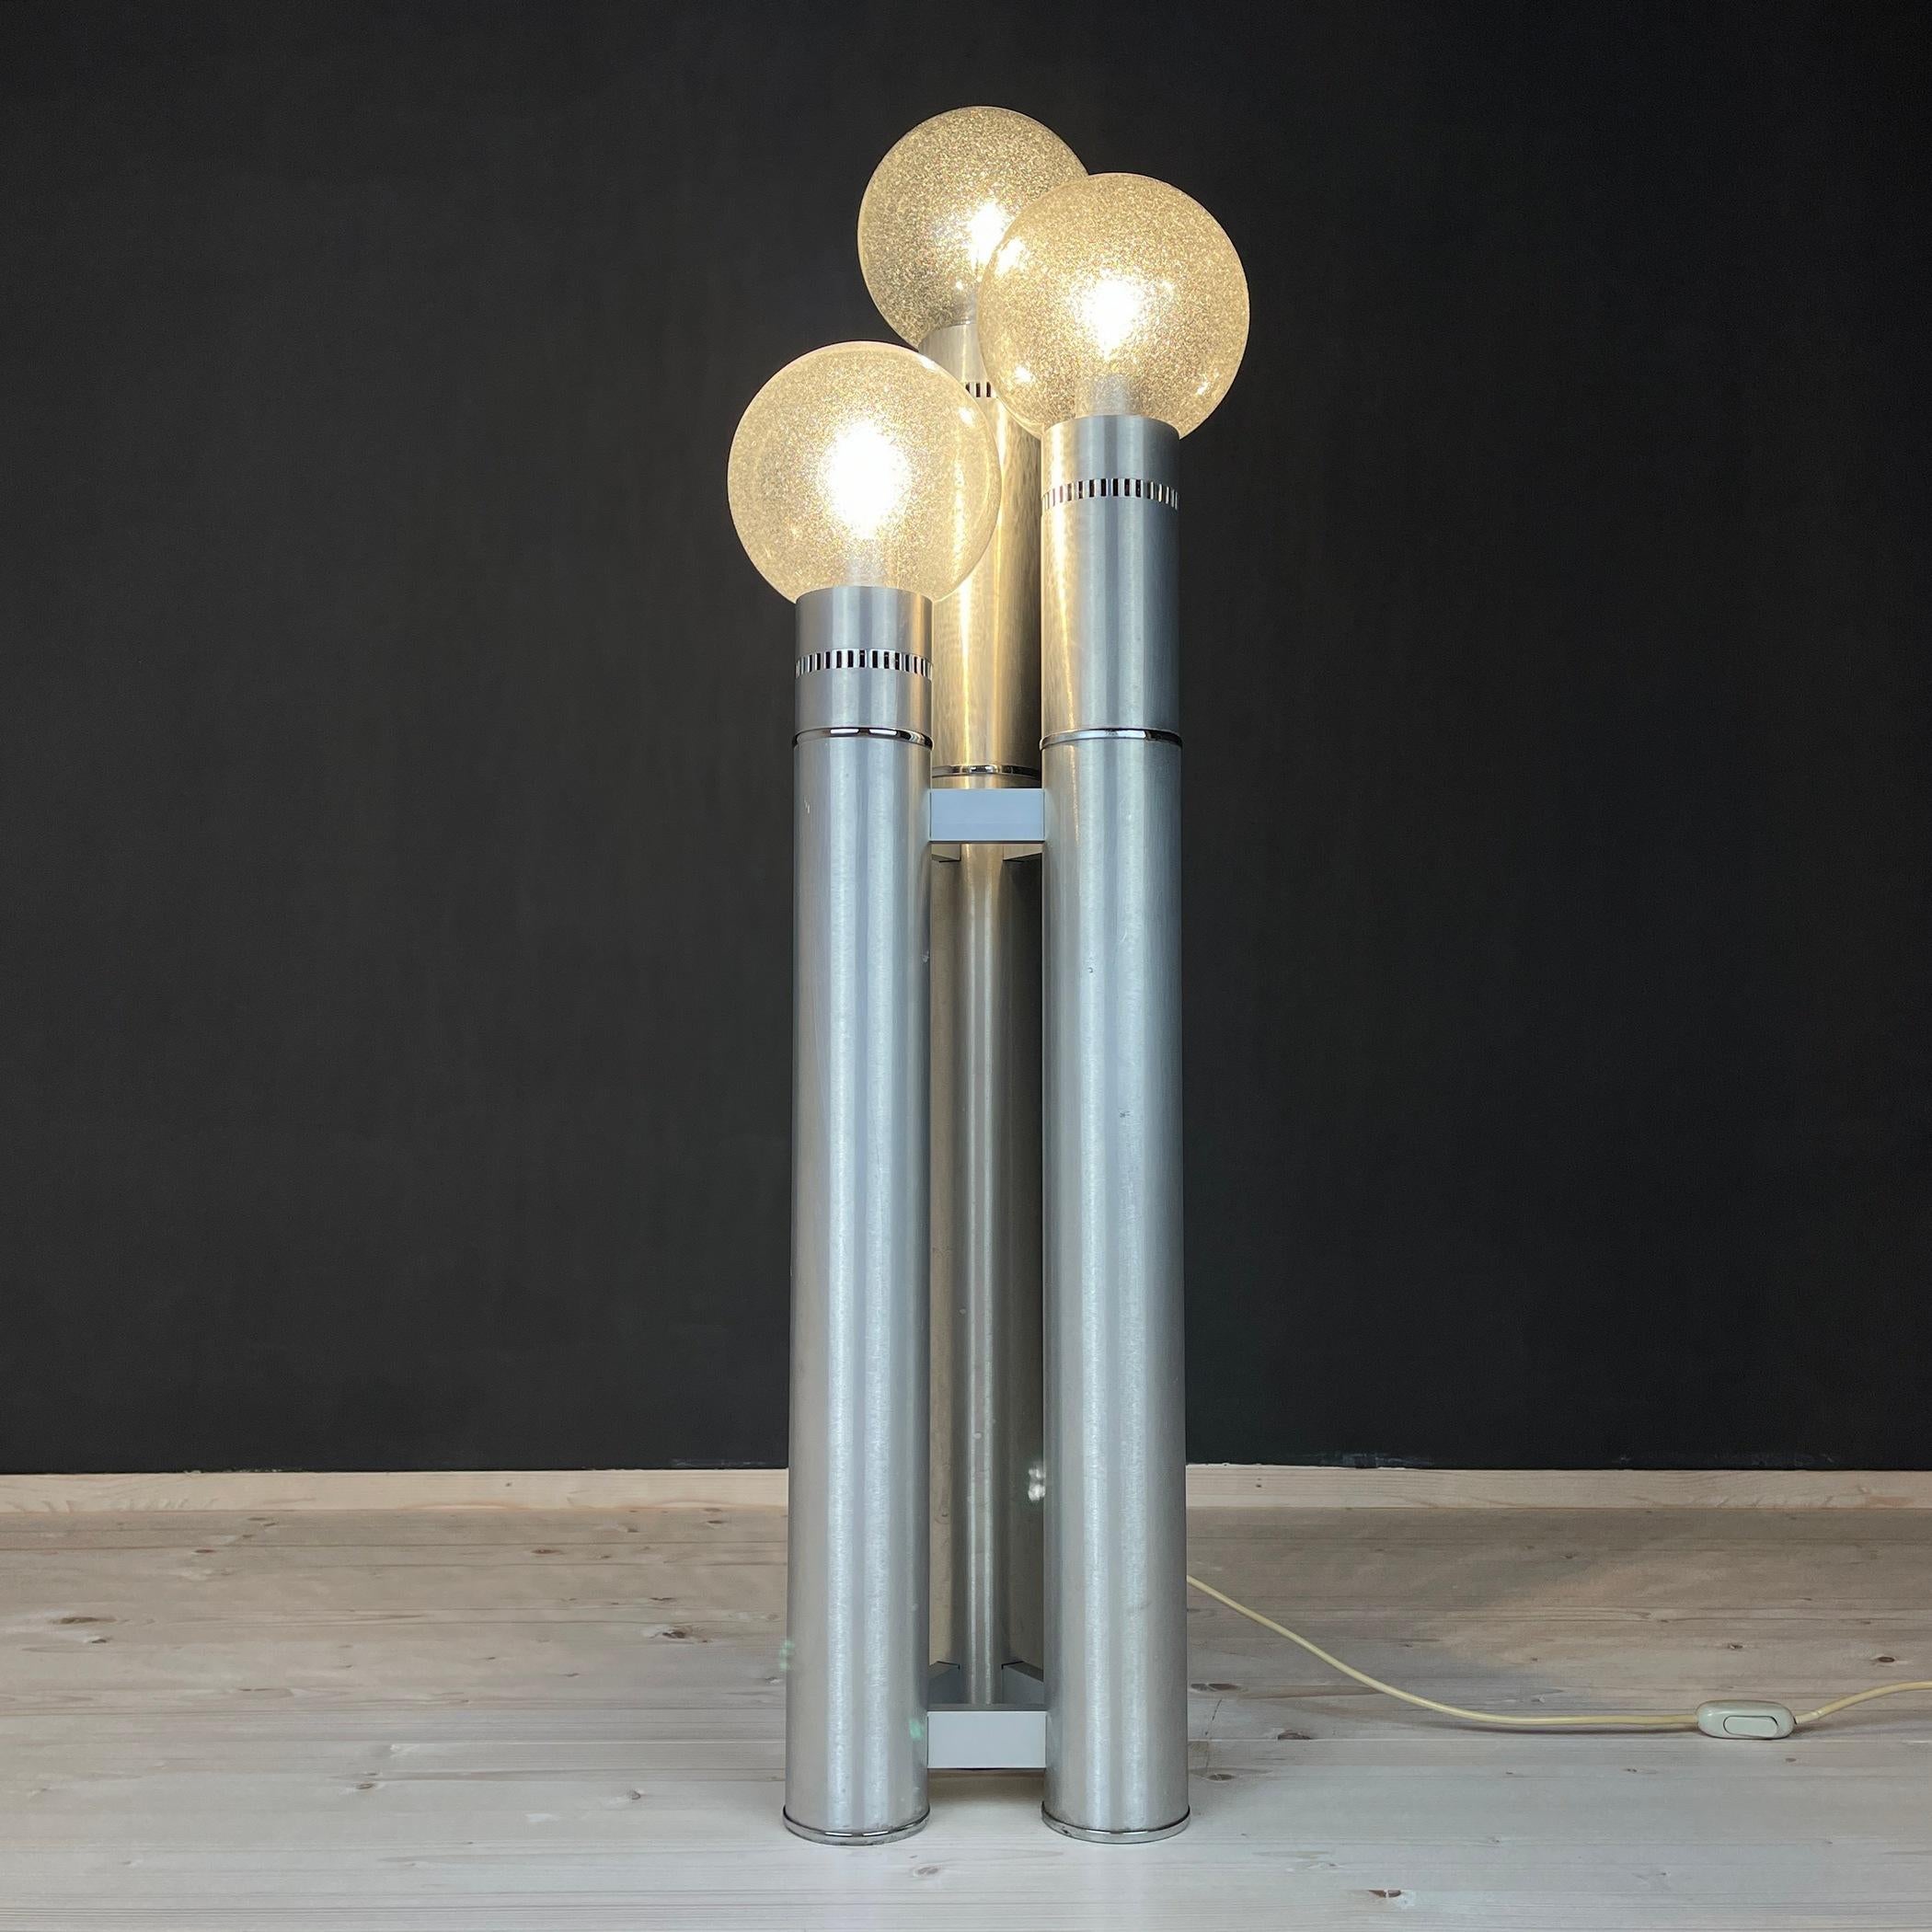 Excellent brushed aluminum tube floor lamp from Italy. 1970s, Reggiani/Sciolari period. Three tubes with varying heights and bubble glass ball shades. The lamp is still in excellent working order. There are undoubtedly some stains or other evidence